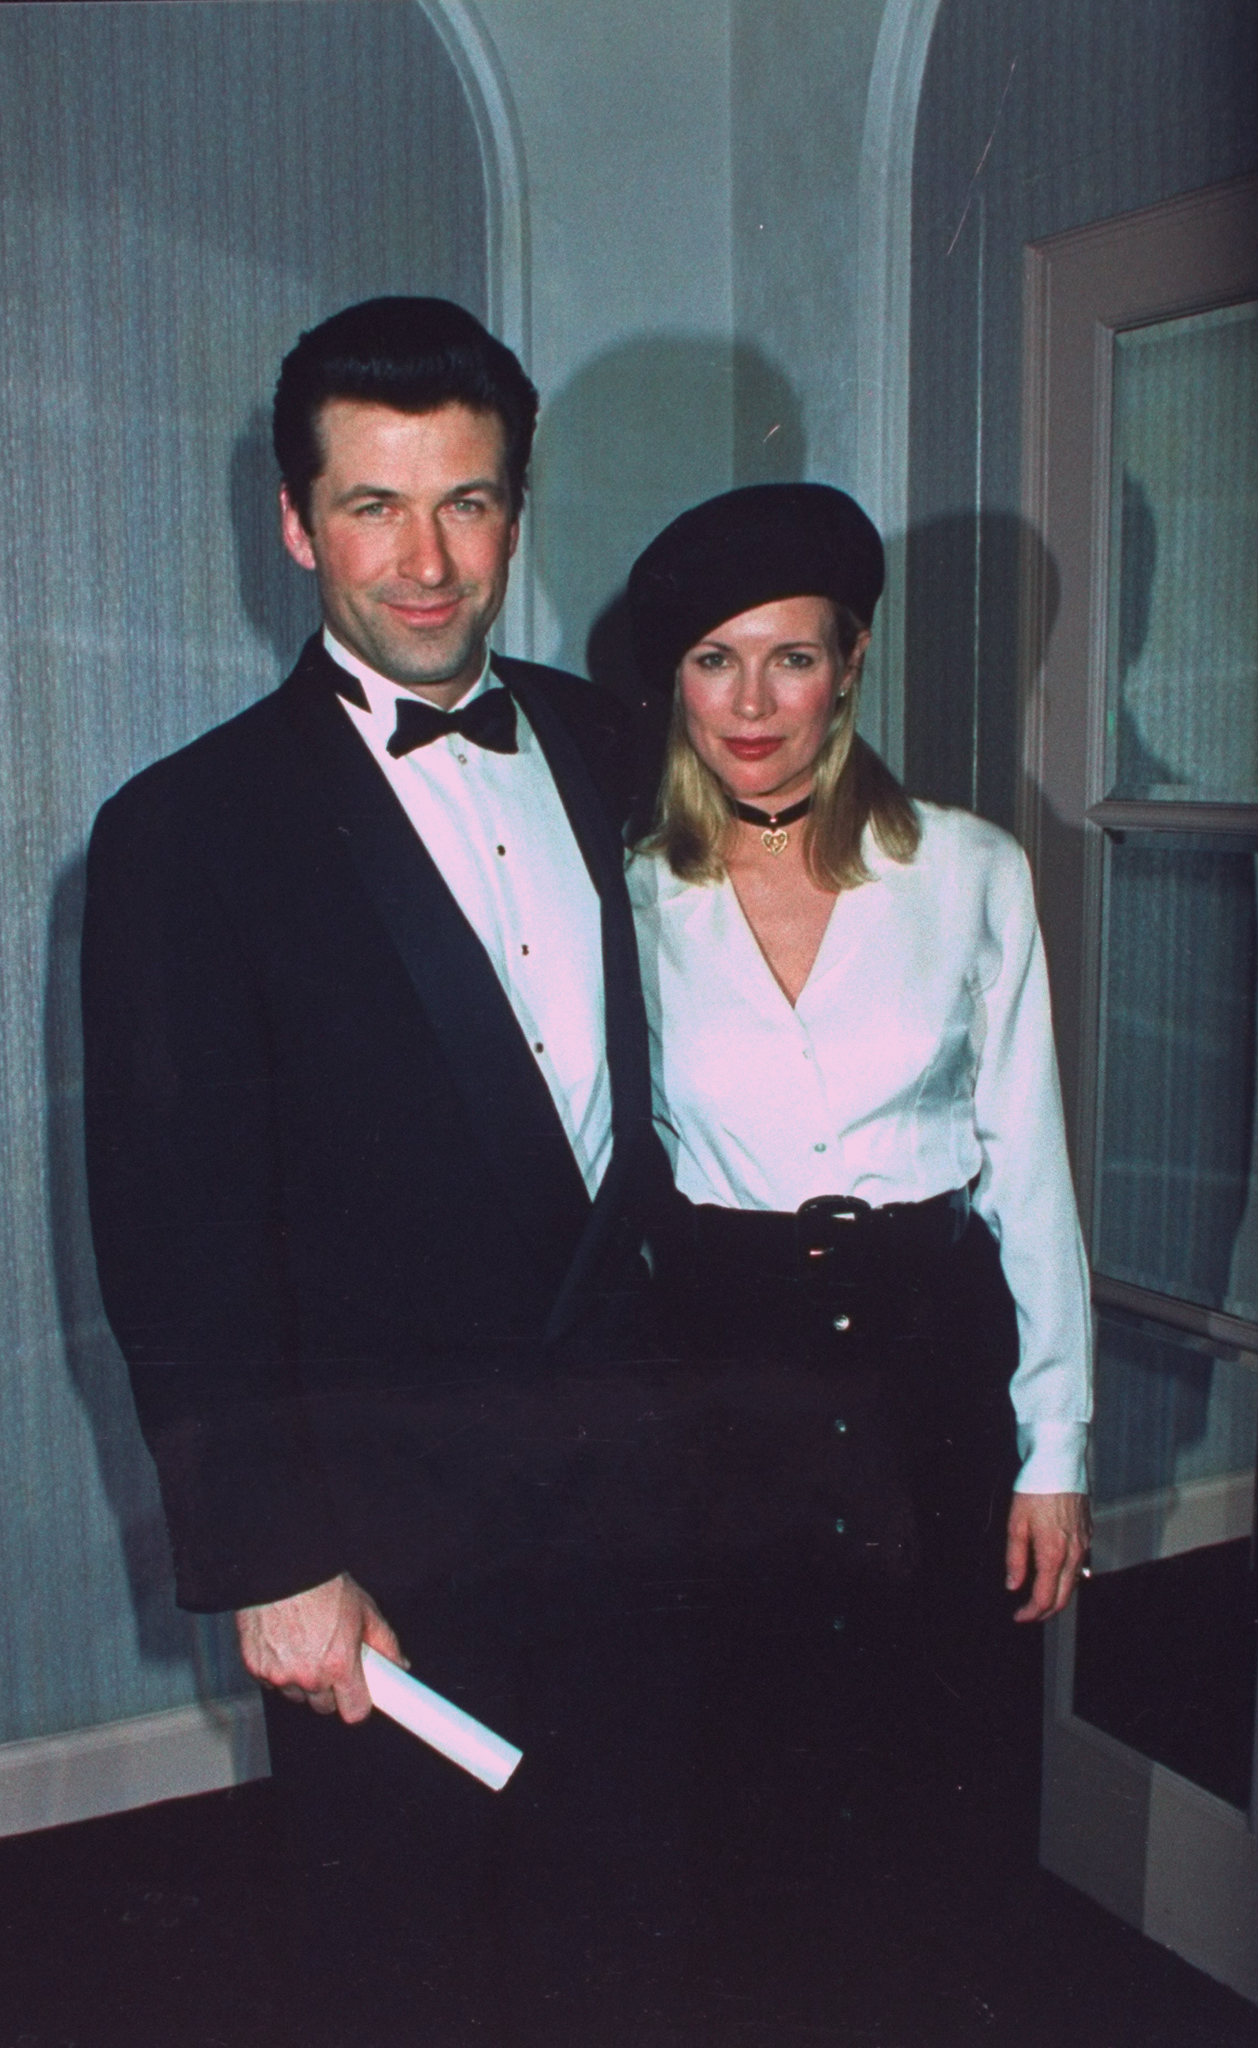 Kim Basinger during Museum of the Moving Image party in honor of actor Al Pacino on 1993-02-20  